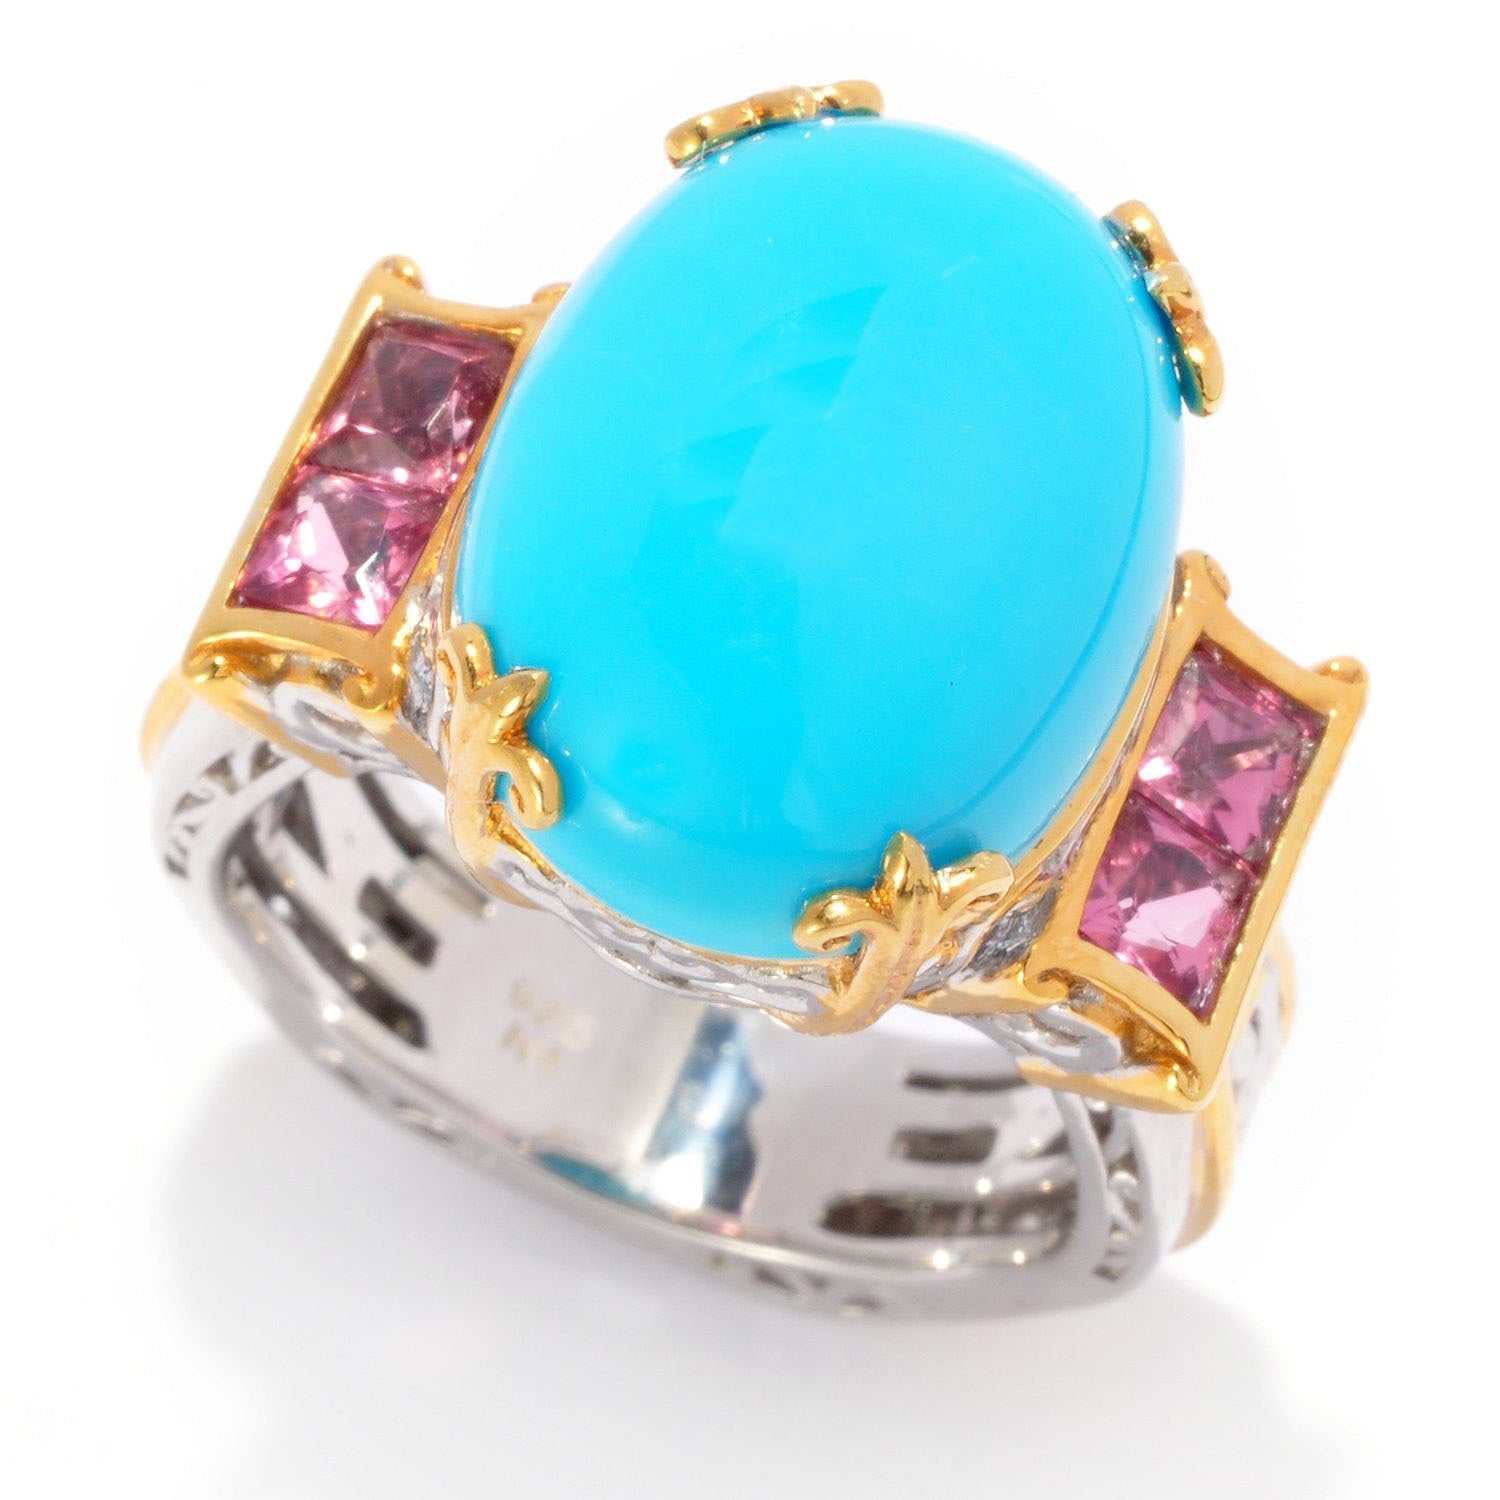 https://gevapps.com/products-importer/uploads/Michael-Valitutti-Sleepign-Beauty-Turquoise-and-Pink-Tourmaline-Ring-c6cf64e8-2817-4192-afaa-7bde5ead87f6.jpg